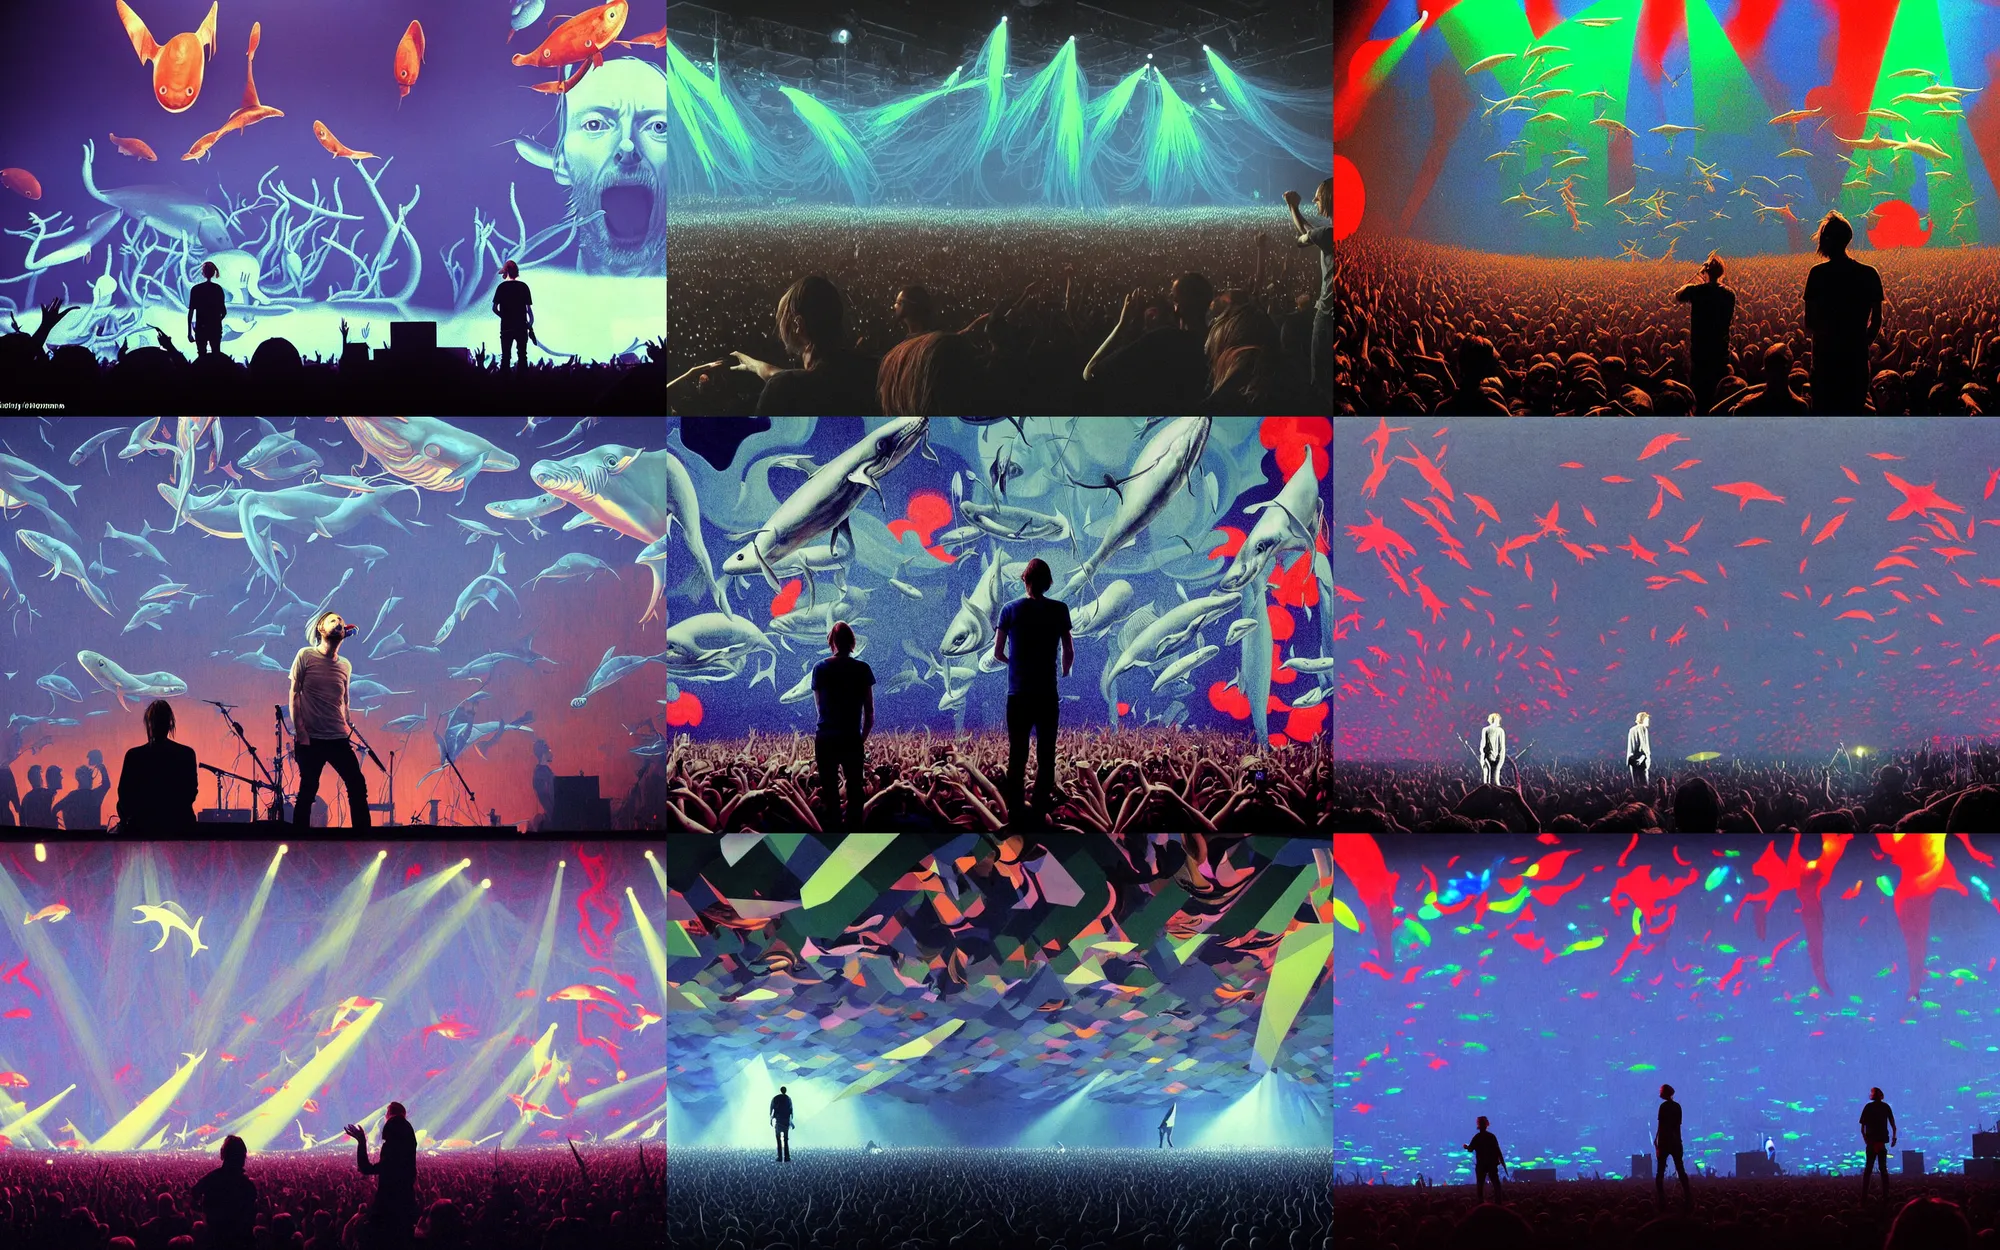 Prompt: thom yorke on stage at a radiohead concert, seeing weird fishes swimming in the air, whales, mantis, dolphins and swordfish, thom yorke and the band looked surprised, painting by james jean and norman rockwell, volumetric light, large crowd and lightshow in the background, very detailed, dreamy, surreal, atmospheric, weird